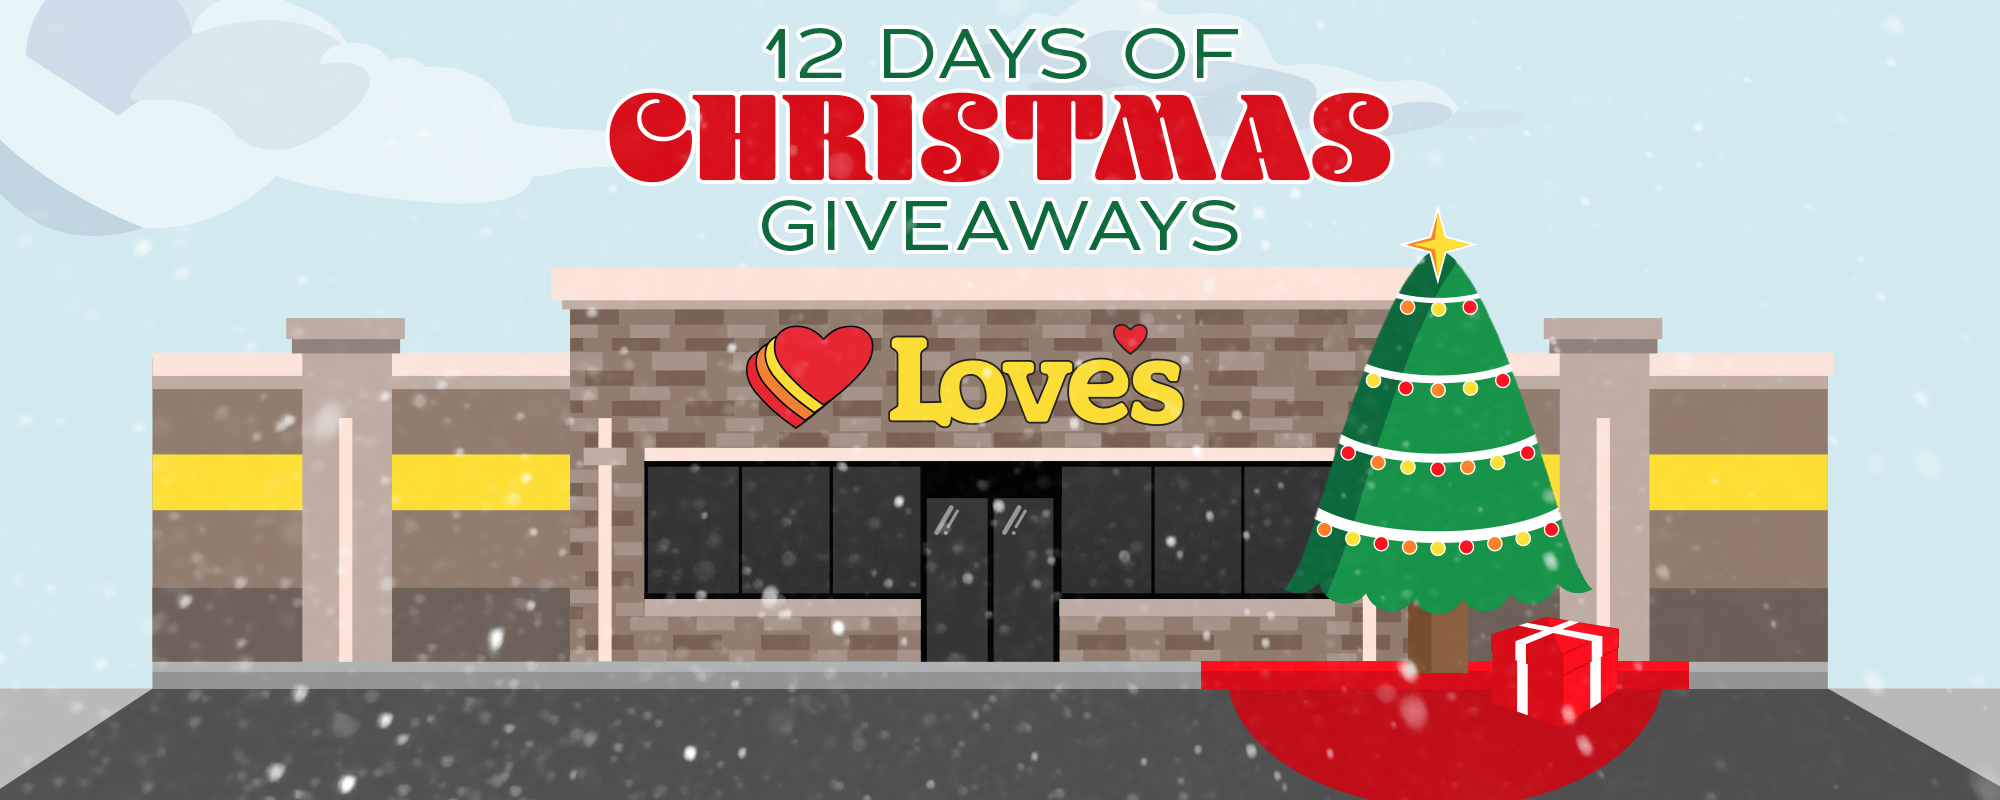 12 Days of Christmas giveaways graphic